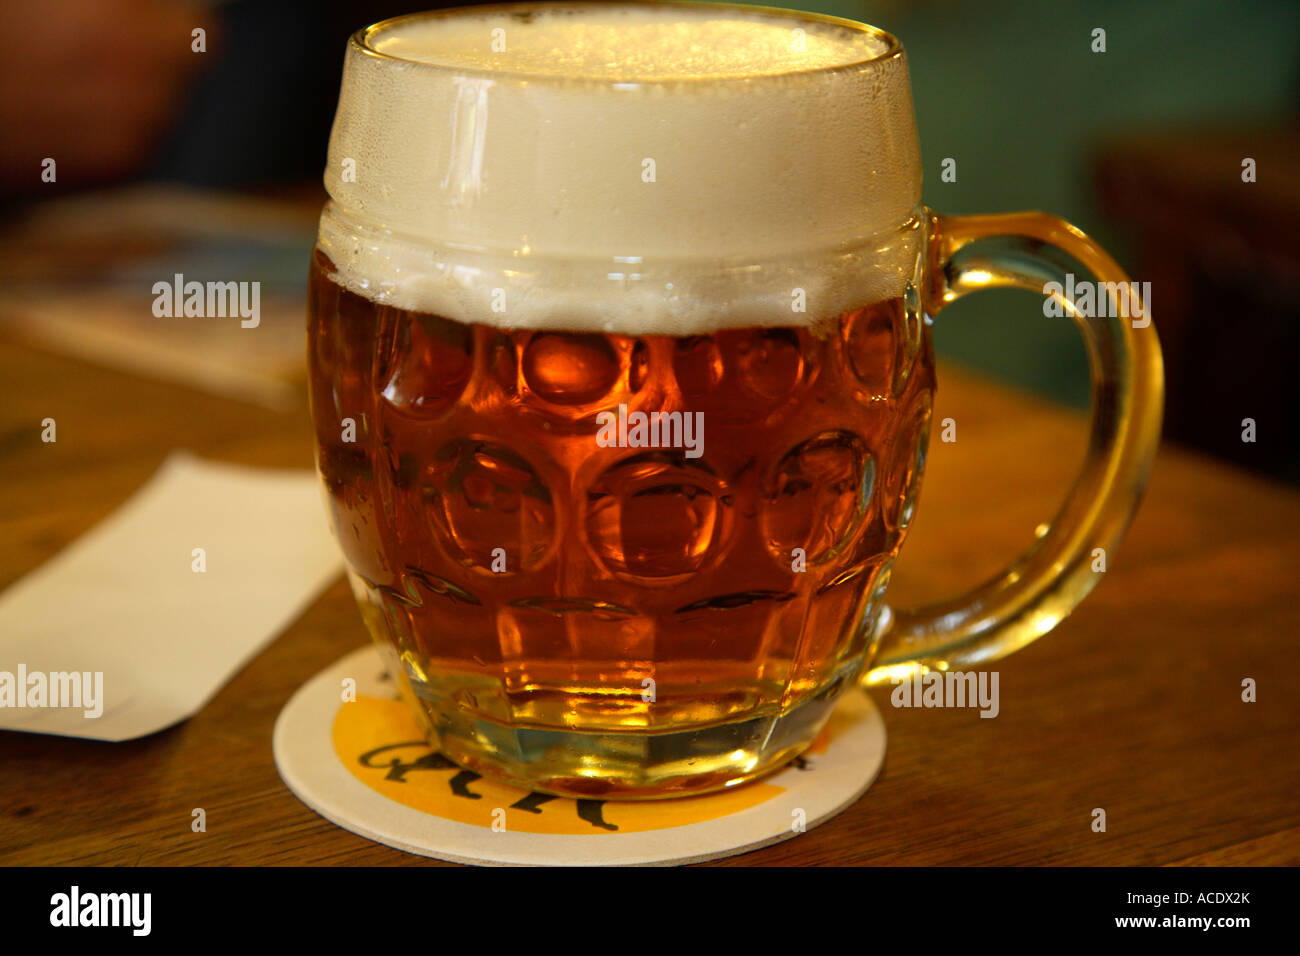 Glass Czech Beer Pilsner Urquell High Resolution Stock Photography and  Images - Alamy